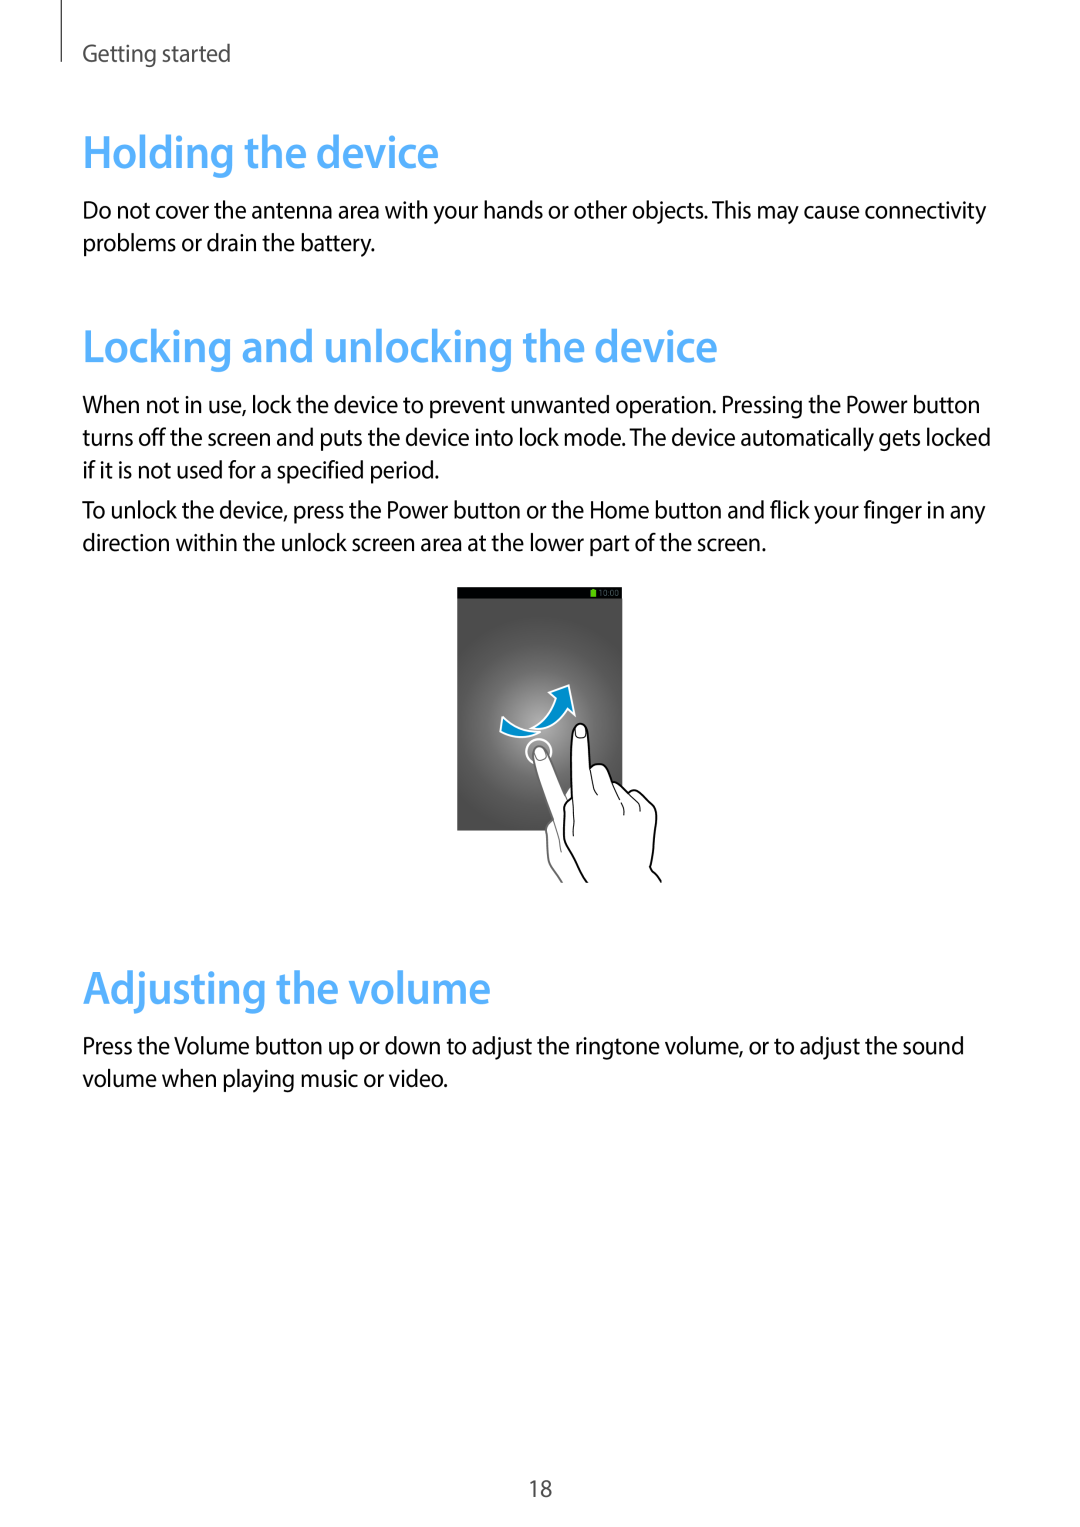 Samsung SM-G7105ZKAAMO manual Holding the device, Locking and unlocking the device, Adjusting the volume, Getting started 